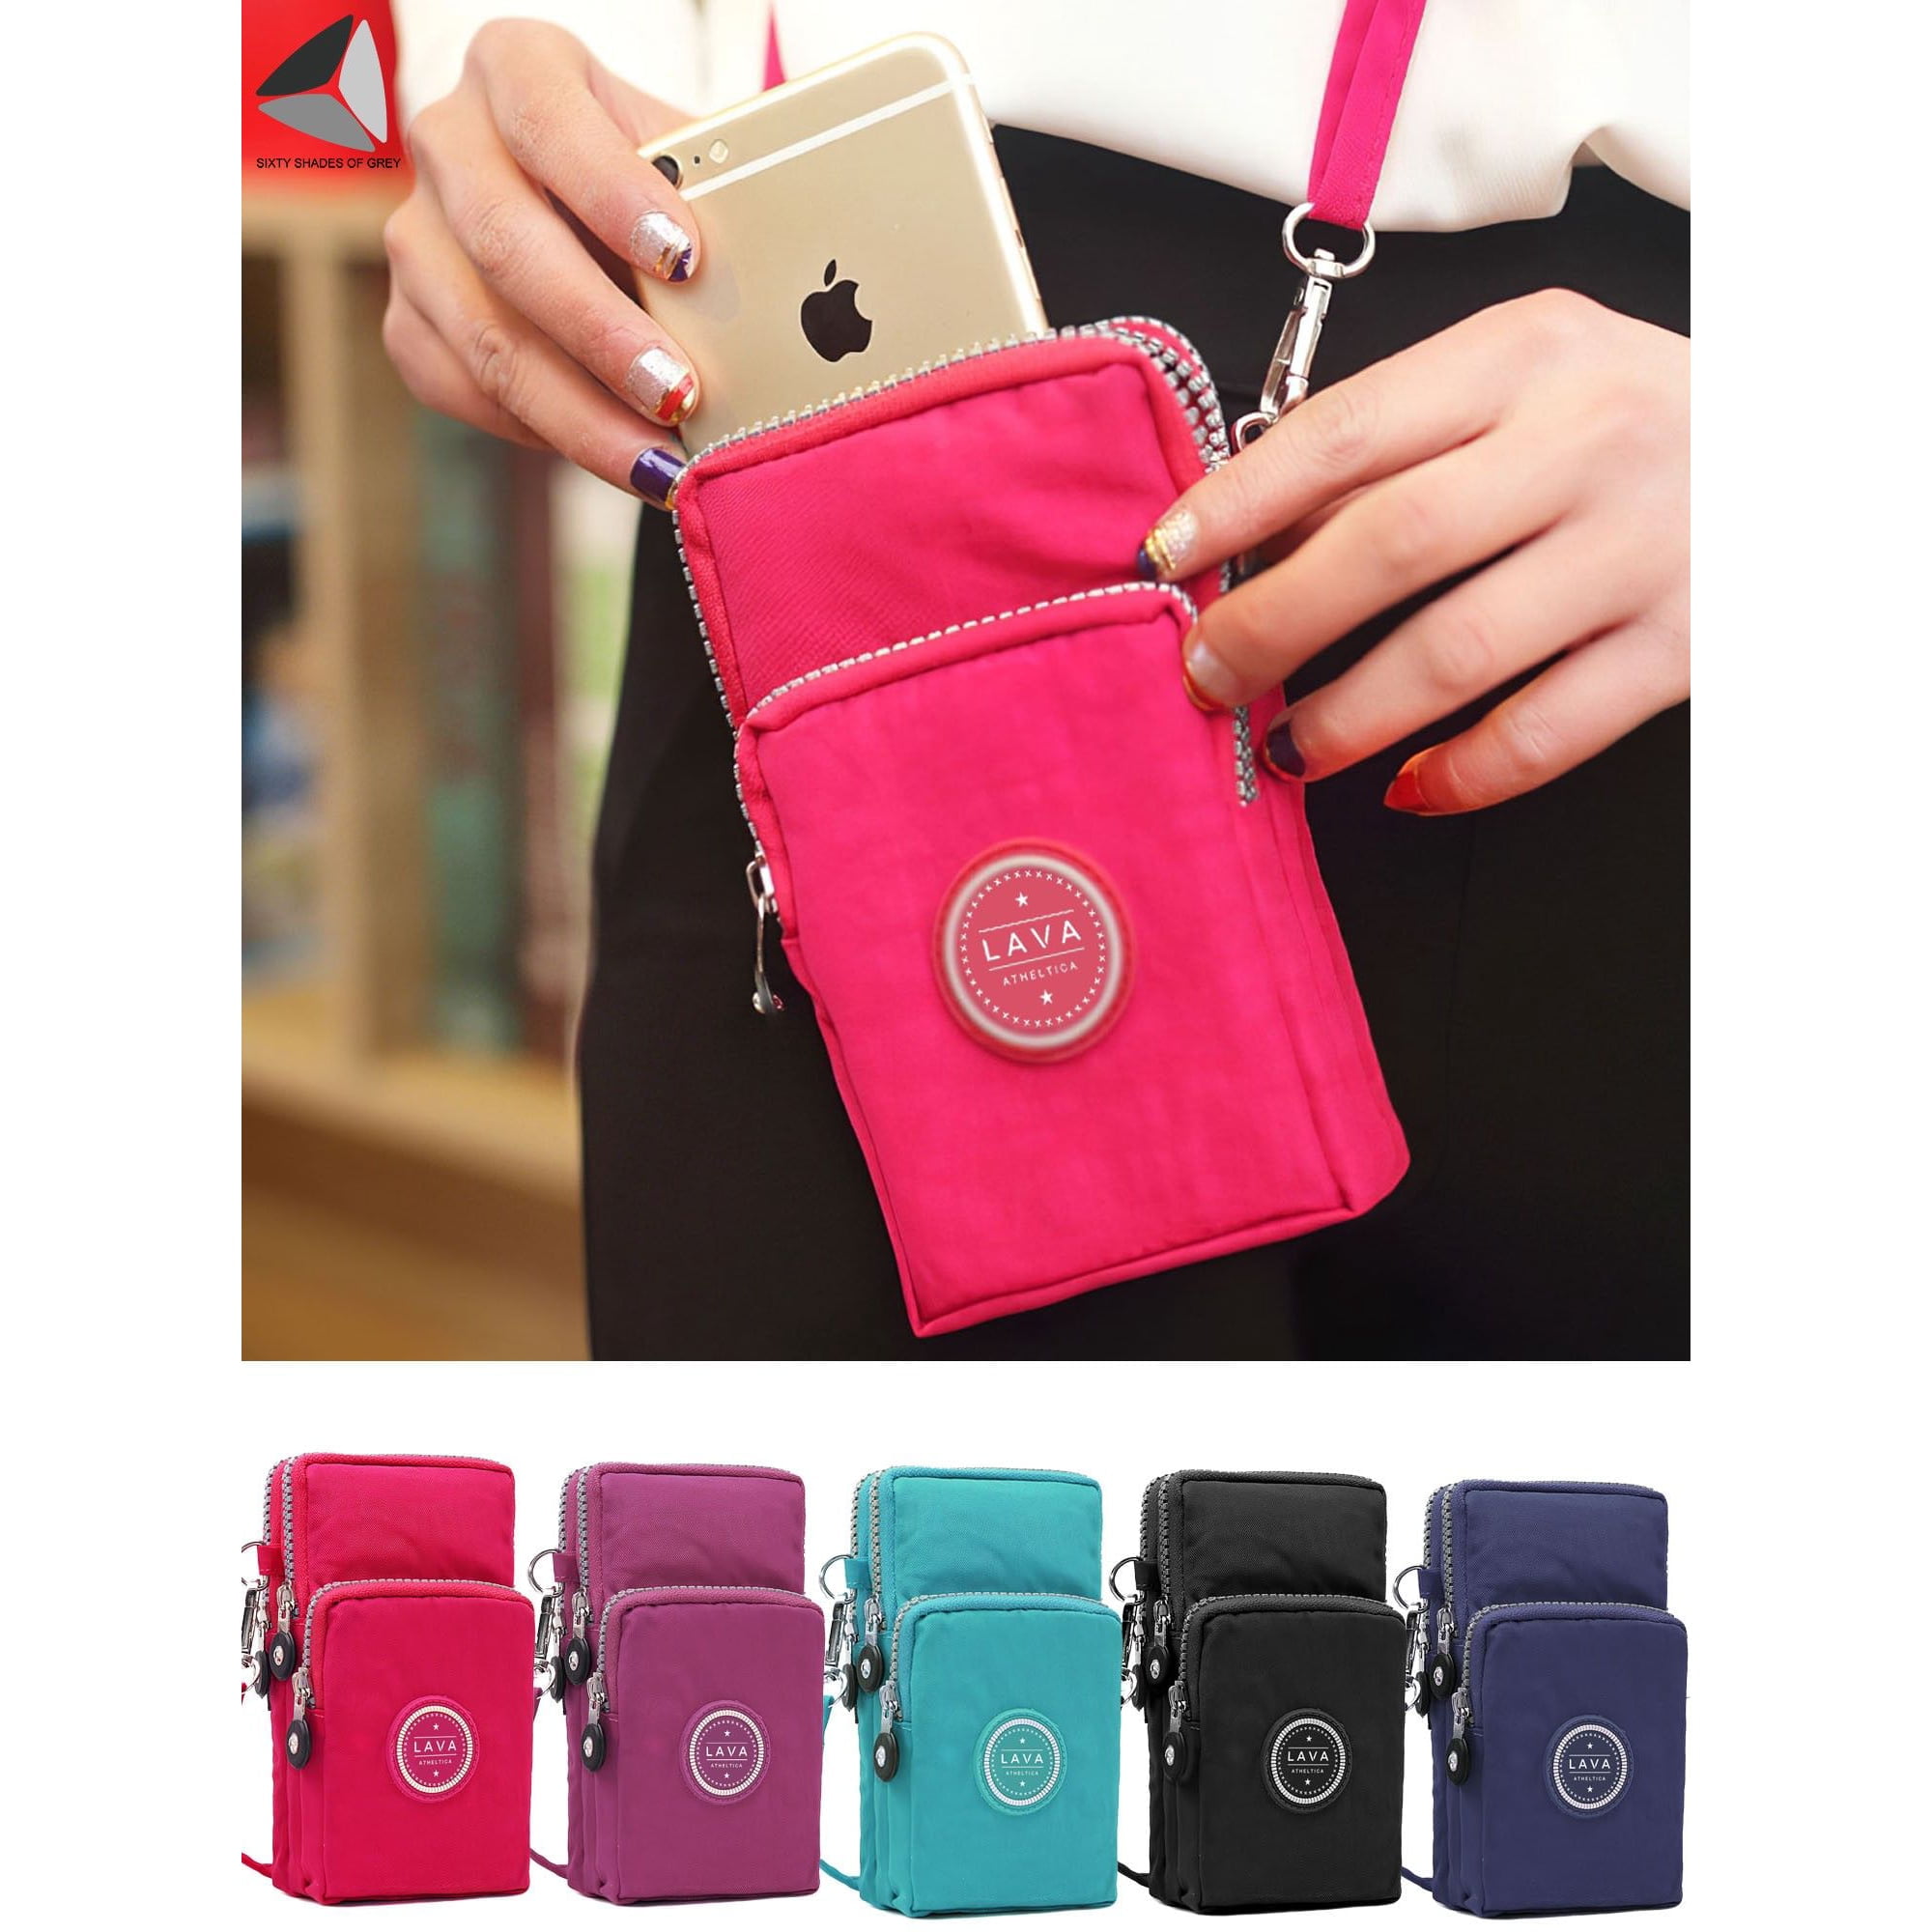 Ultra-Thin Colorful Cellphone Bag Women Wallet Designer Mini Shoulder Bag  New Cell Phone Case Crossbody Bags Fashion Card Purses